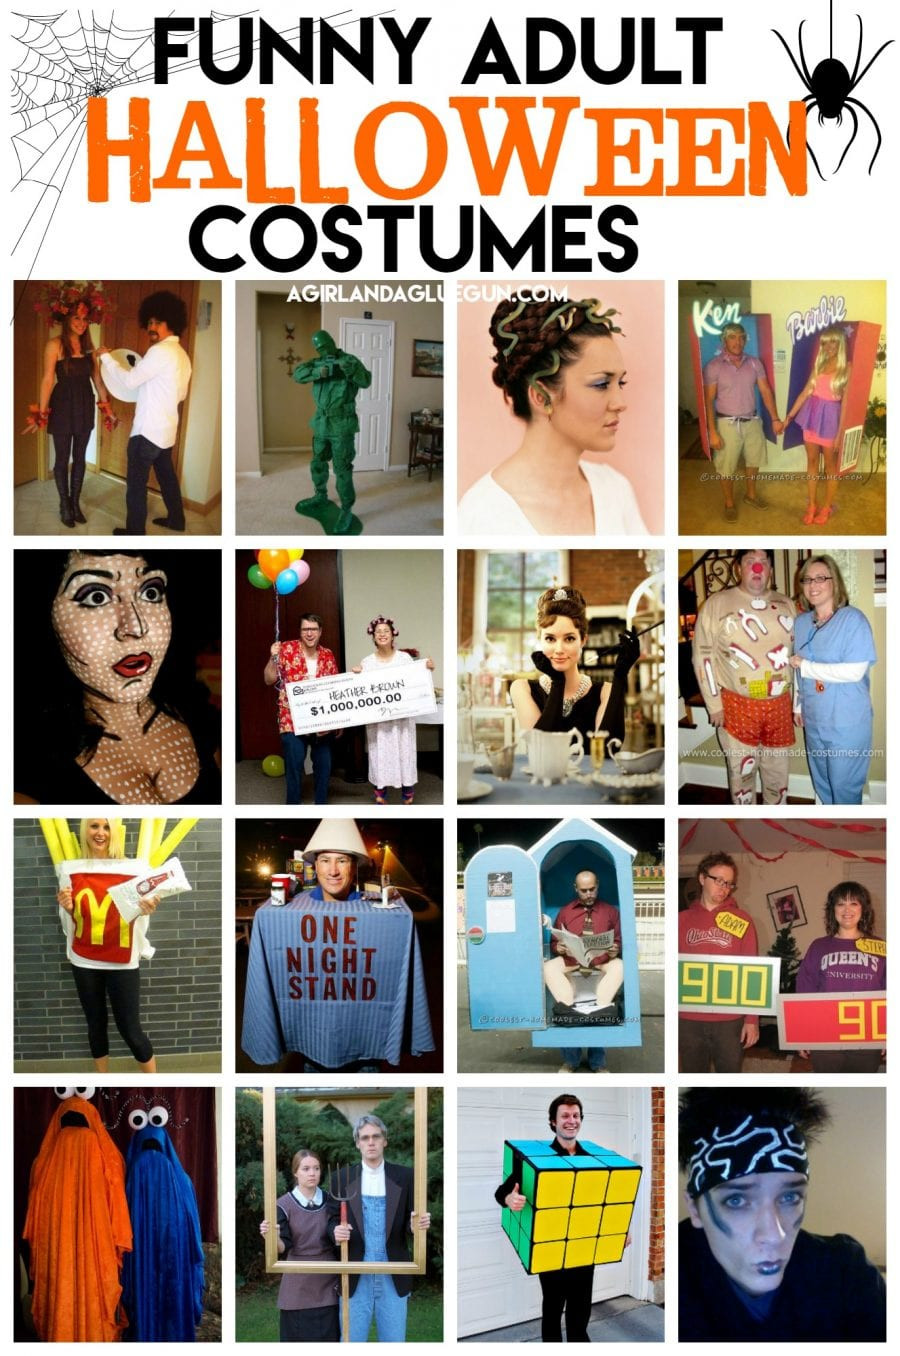 Easy DIY Halloween Costumes For Adults
 Funny Halloween Costumes for Adults that you can DIY A